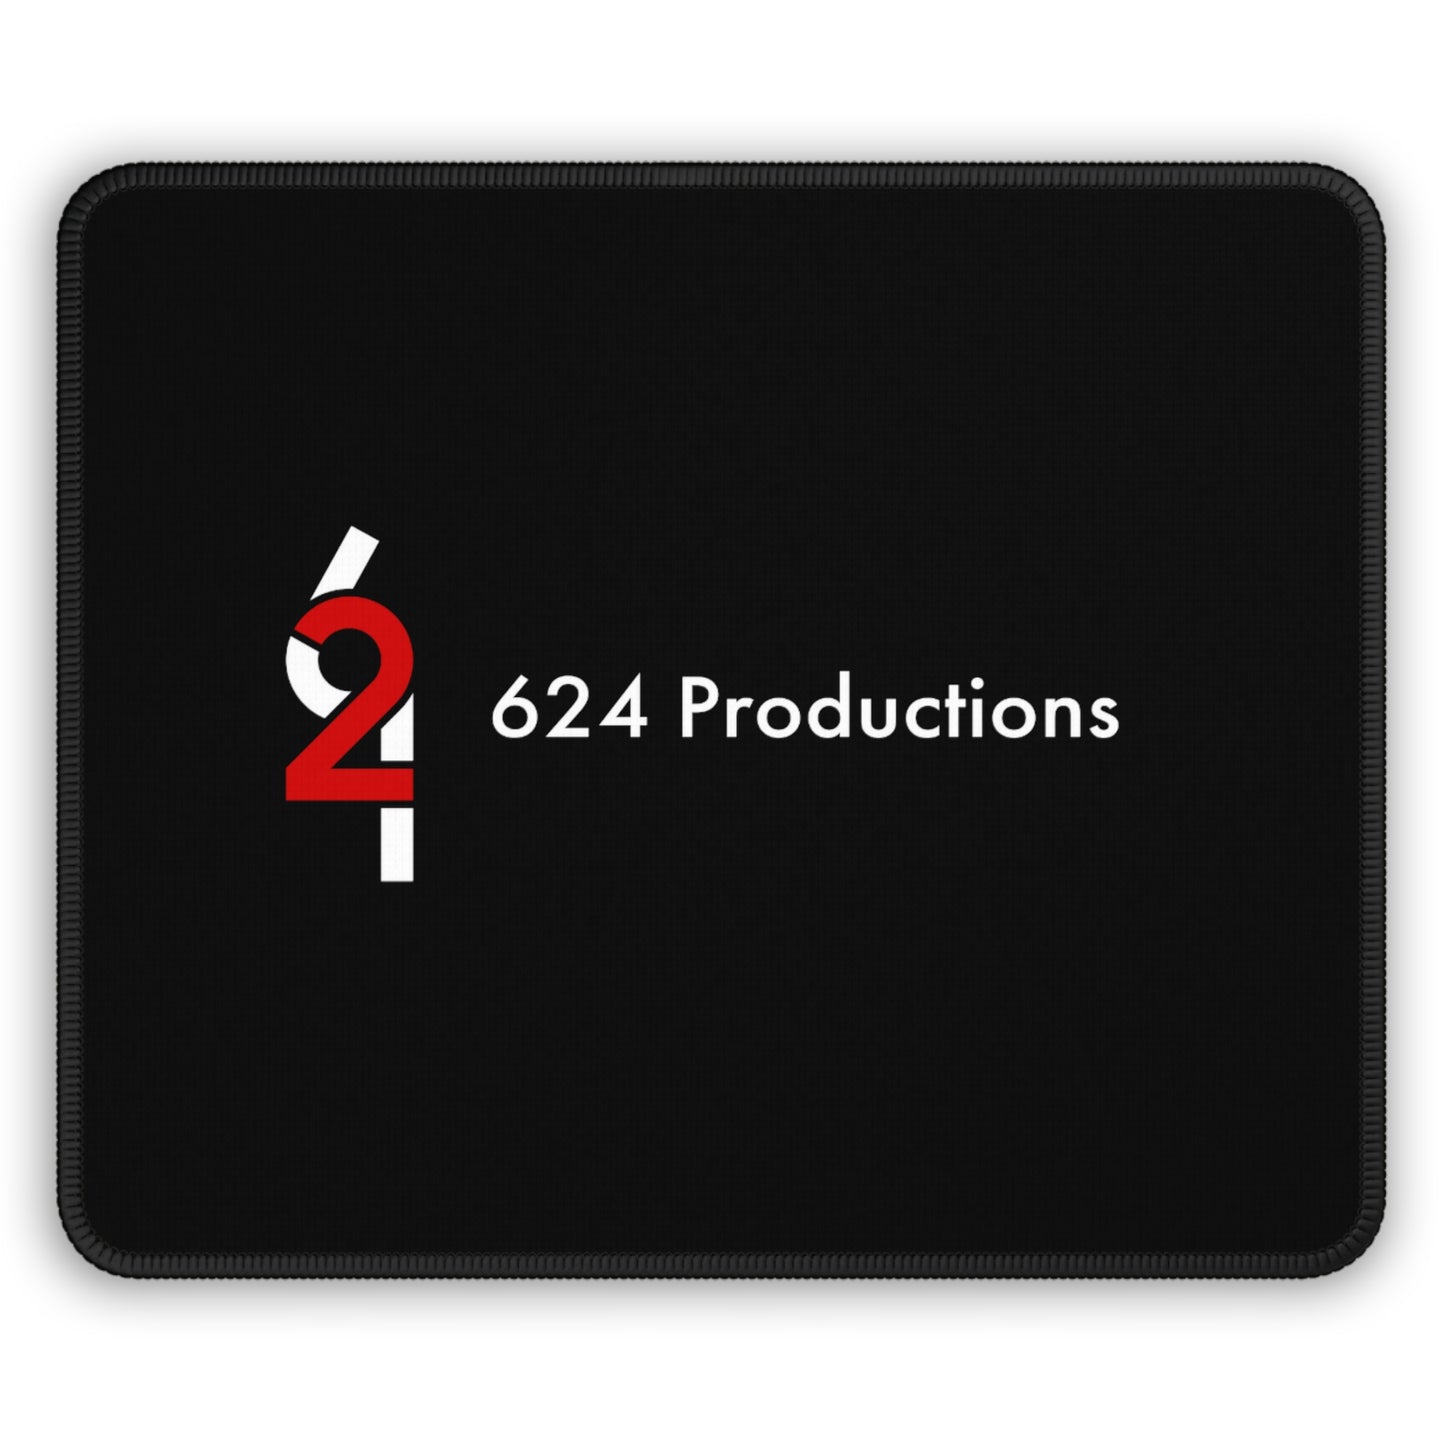 624 Productions Mouse Pad